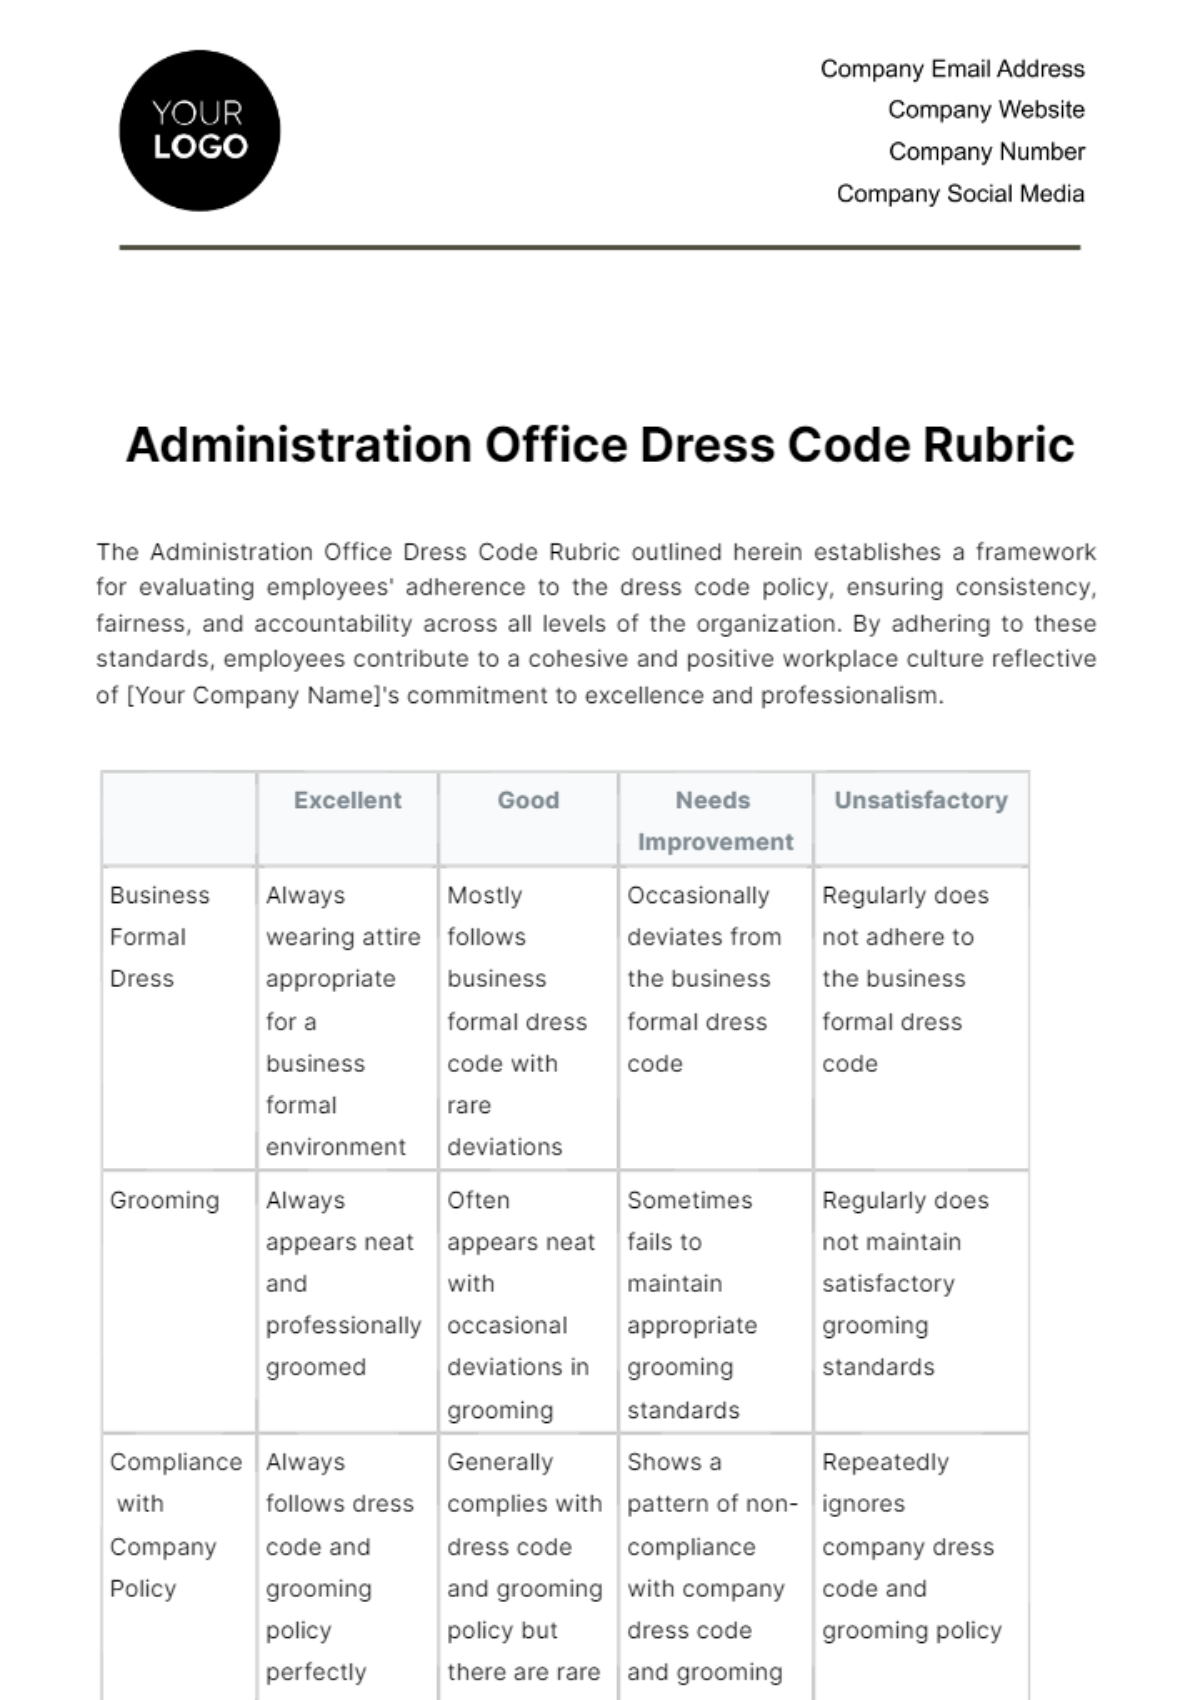 Free Administration Office Dress Code Rubric Template